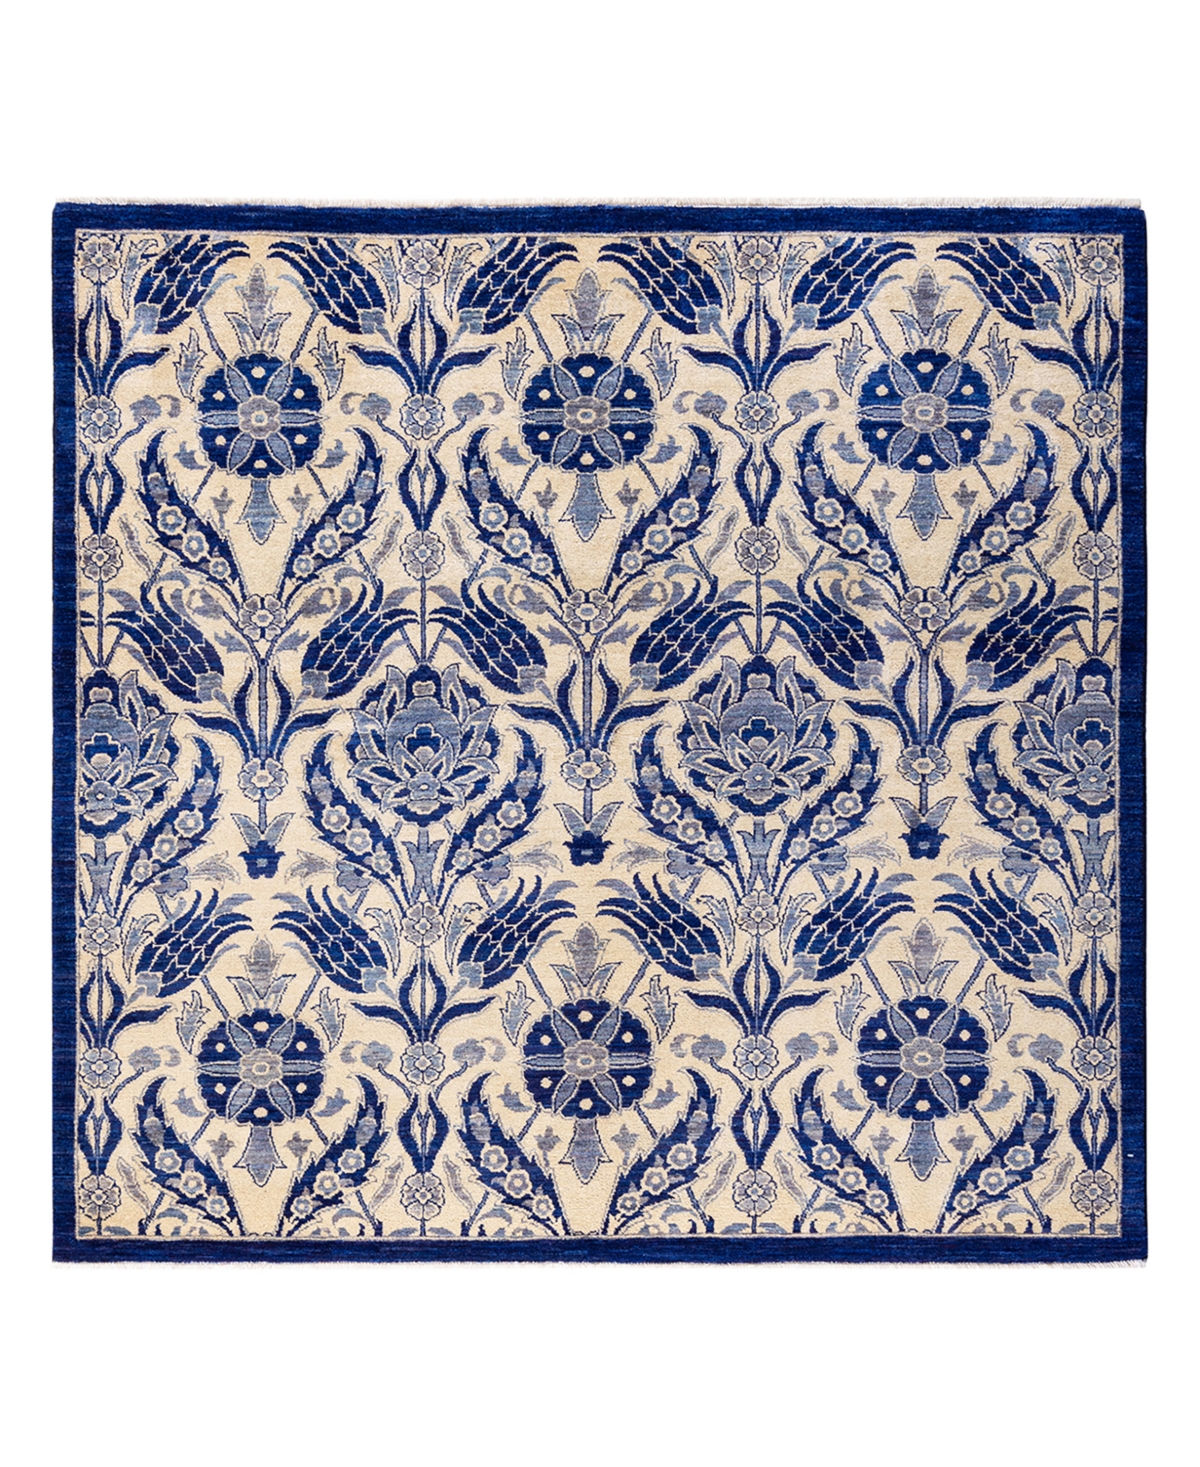 Adorn Hand Woven Rugs Suzani M180131 6'3in x 6'6in Area Rug - Blue